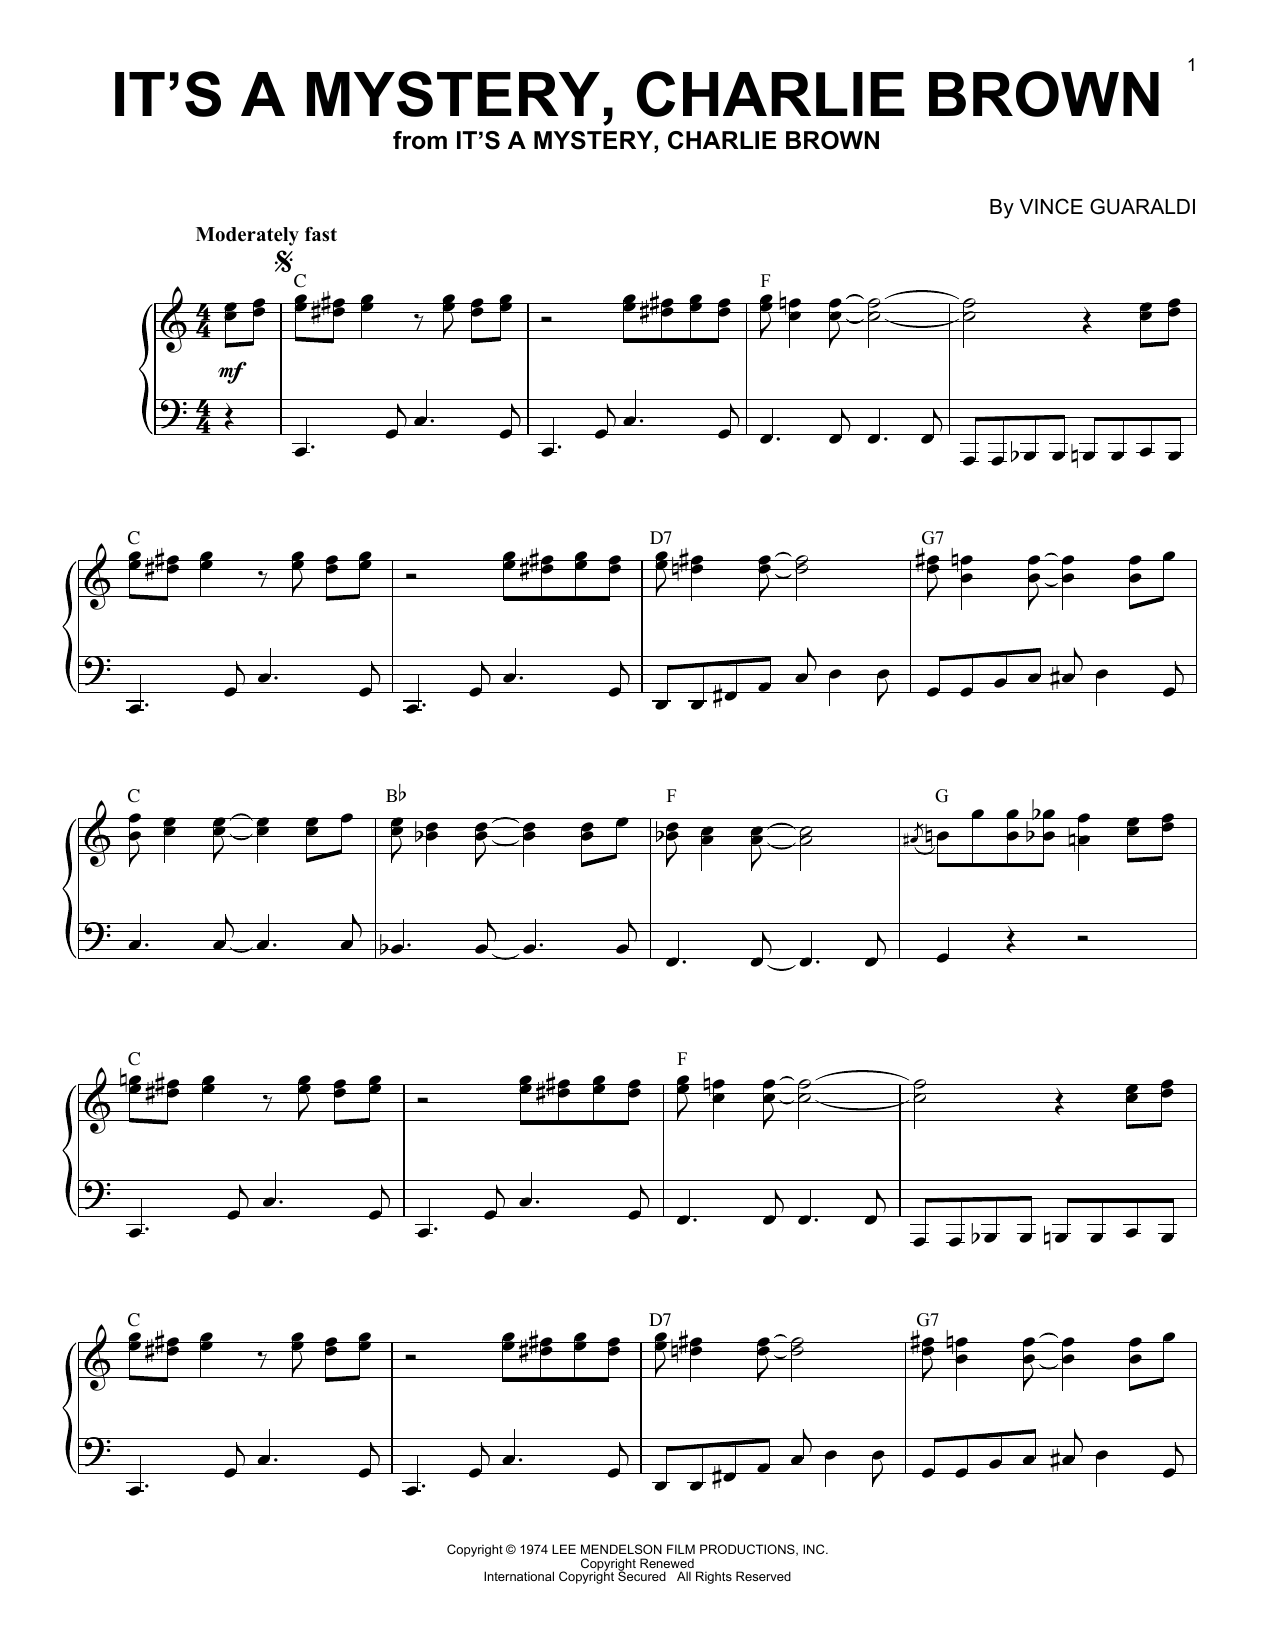 Download Vince Guaraldi It's A Mystery Charlie Brown Sheet Music